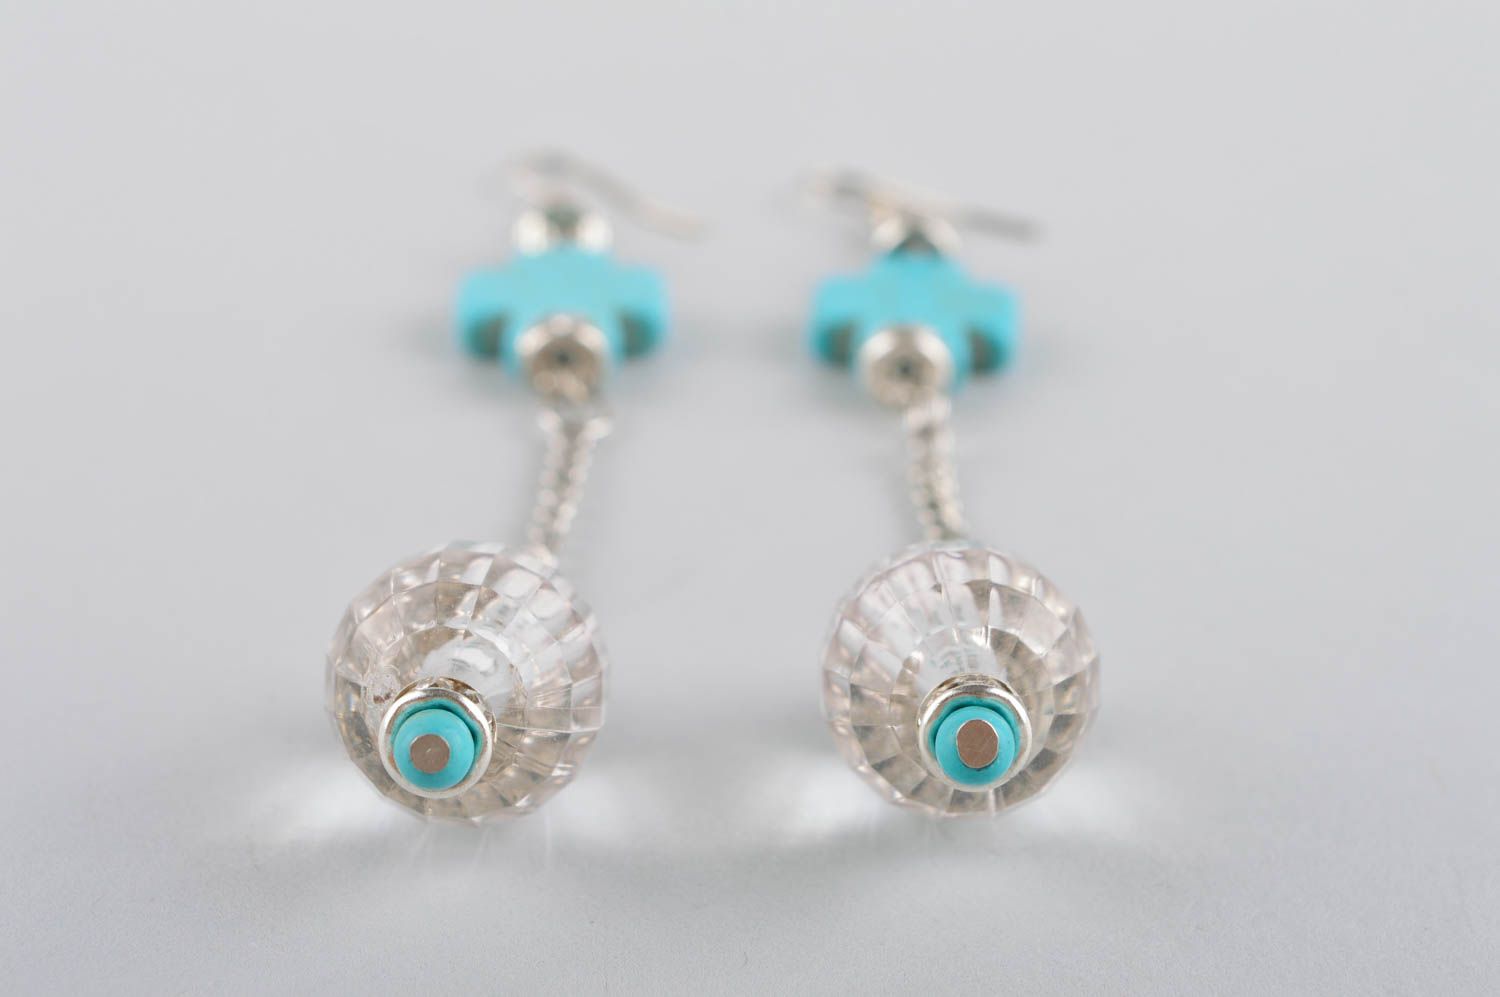 Handmade earrings with turquoise long earrings with charms evening jewelry photo 5